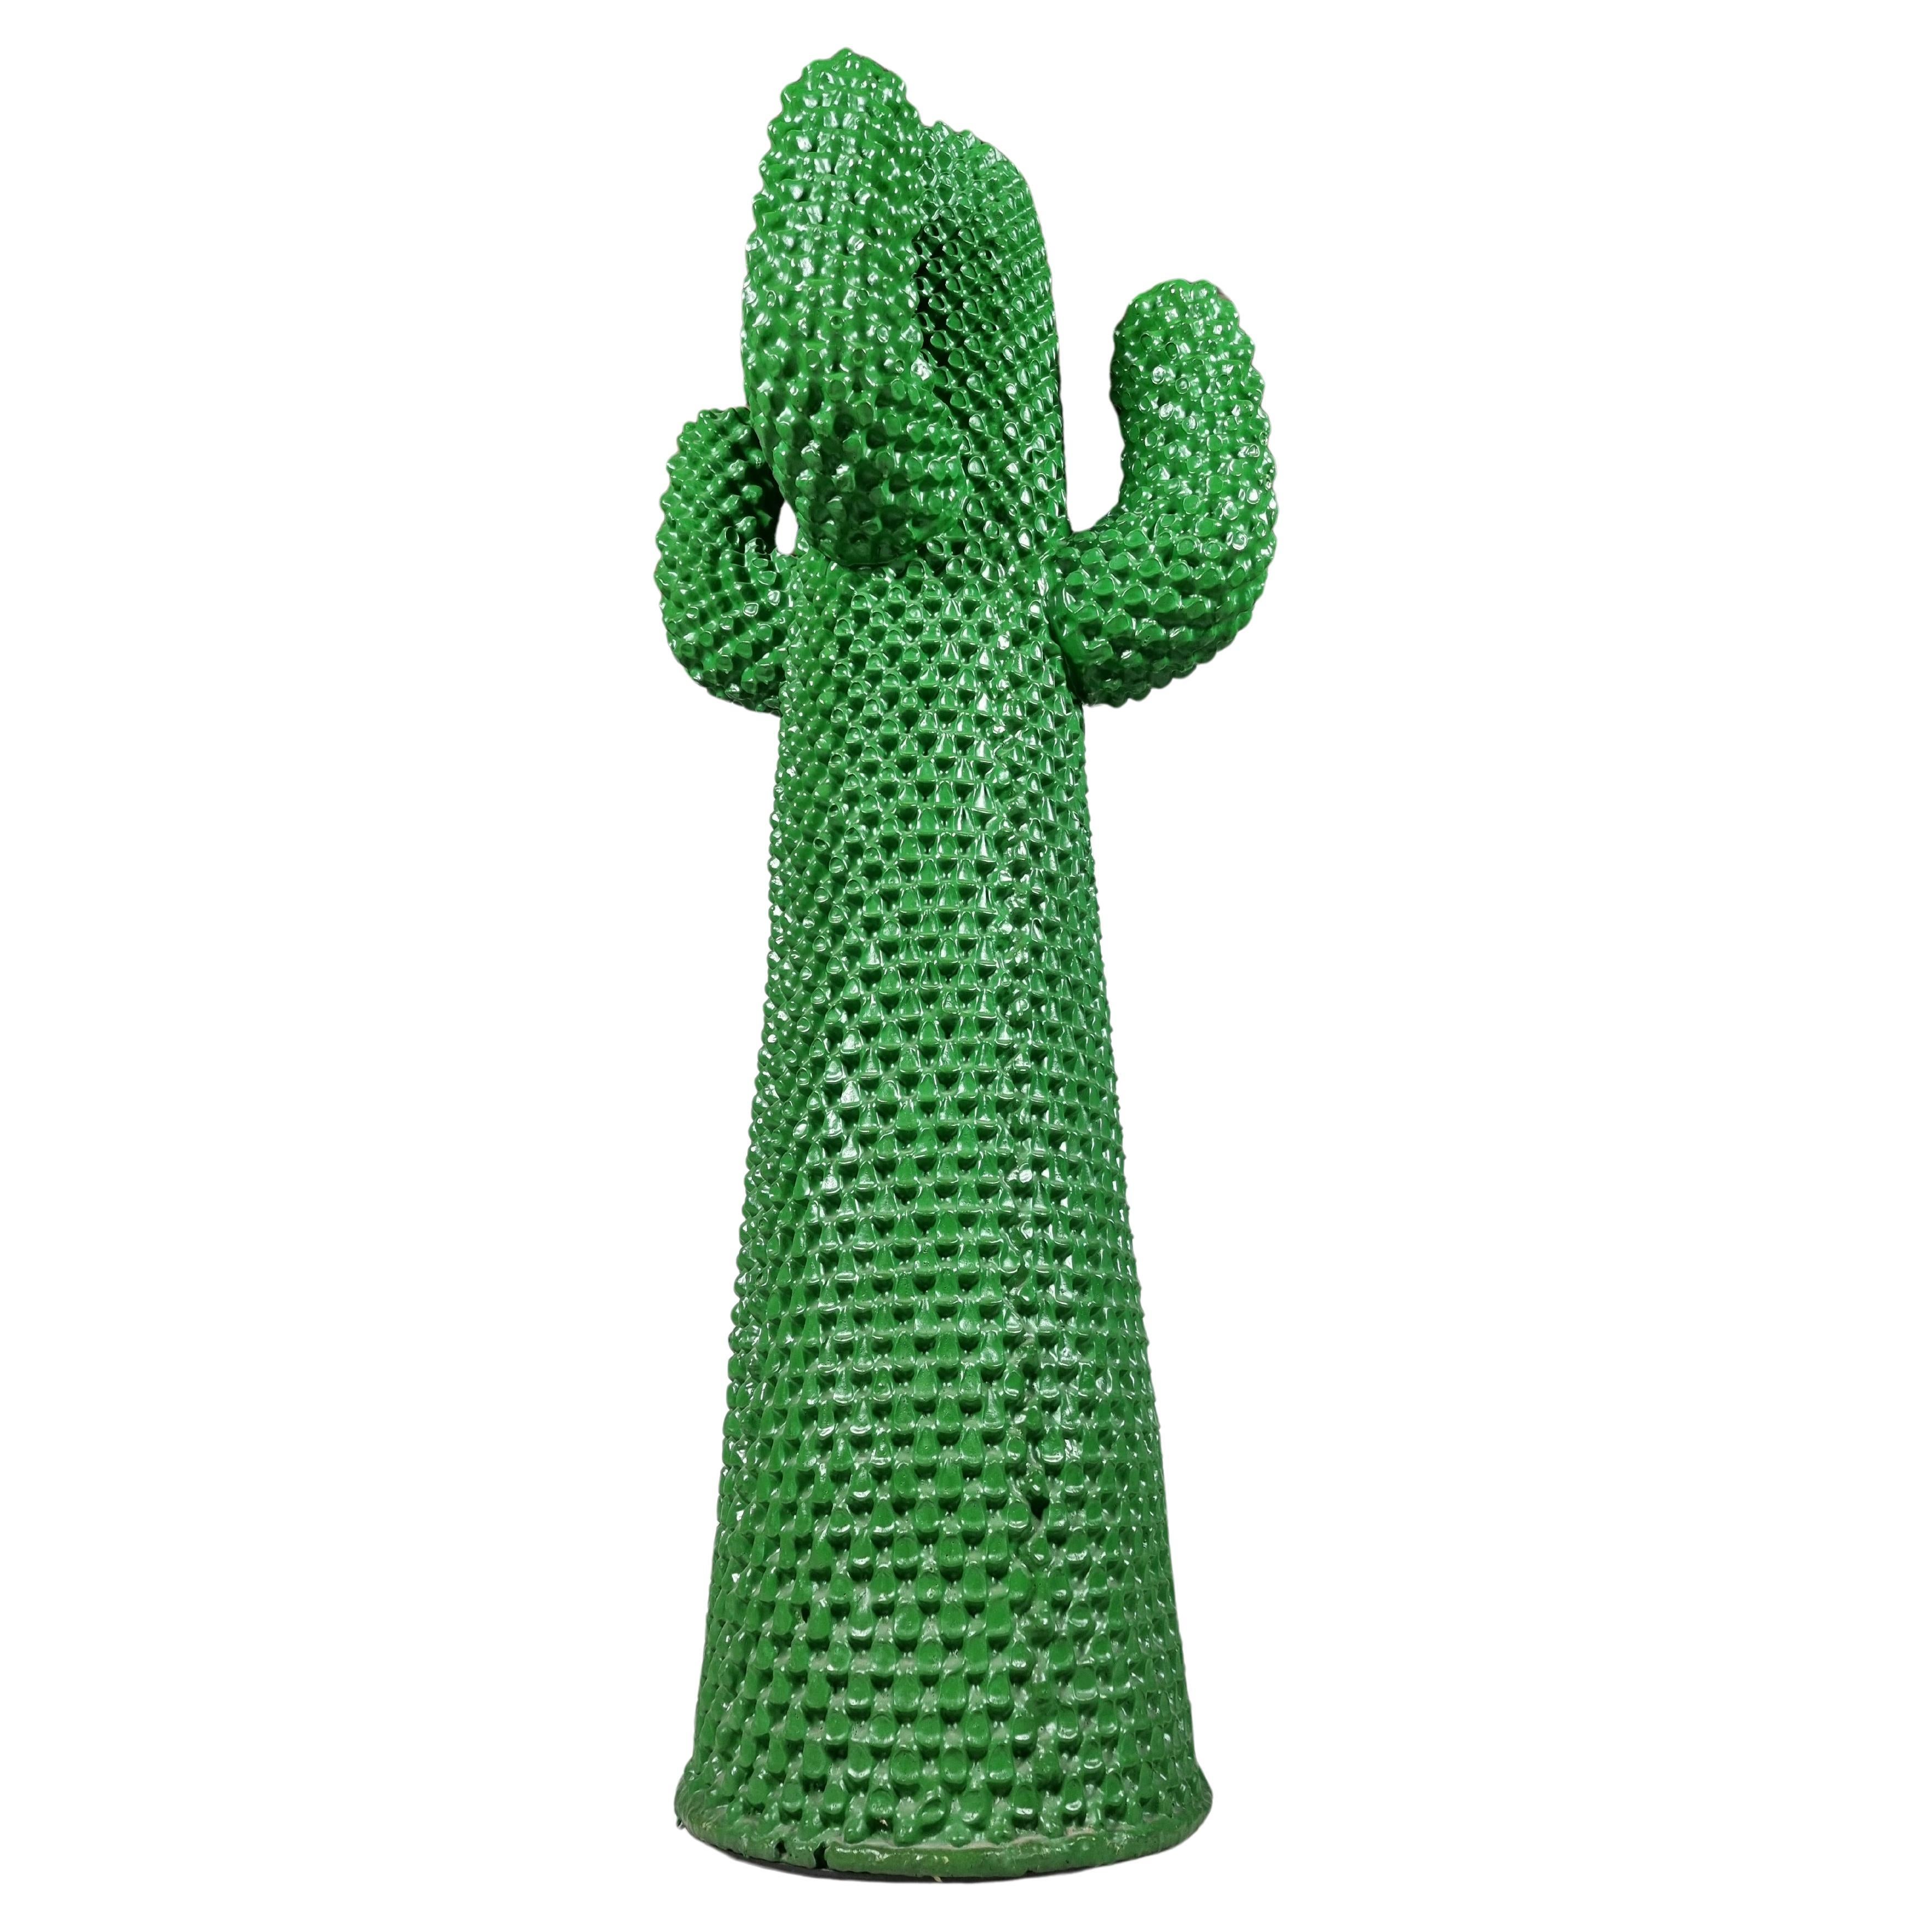  Cactus Coat Rack by Guido Drocco & Franco Mello for Gufram, 1960s For Sale